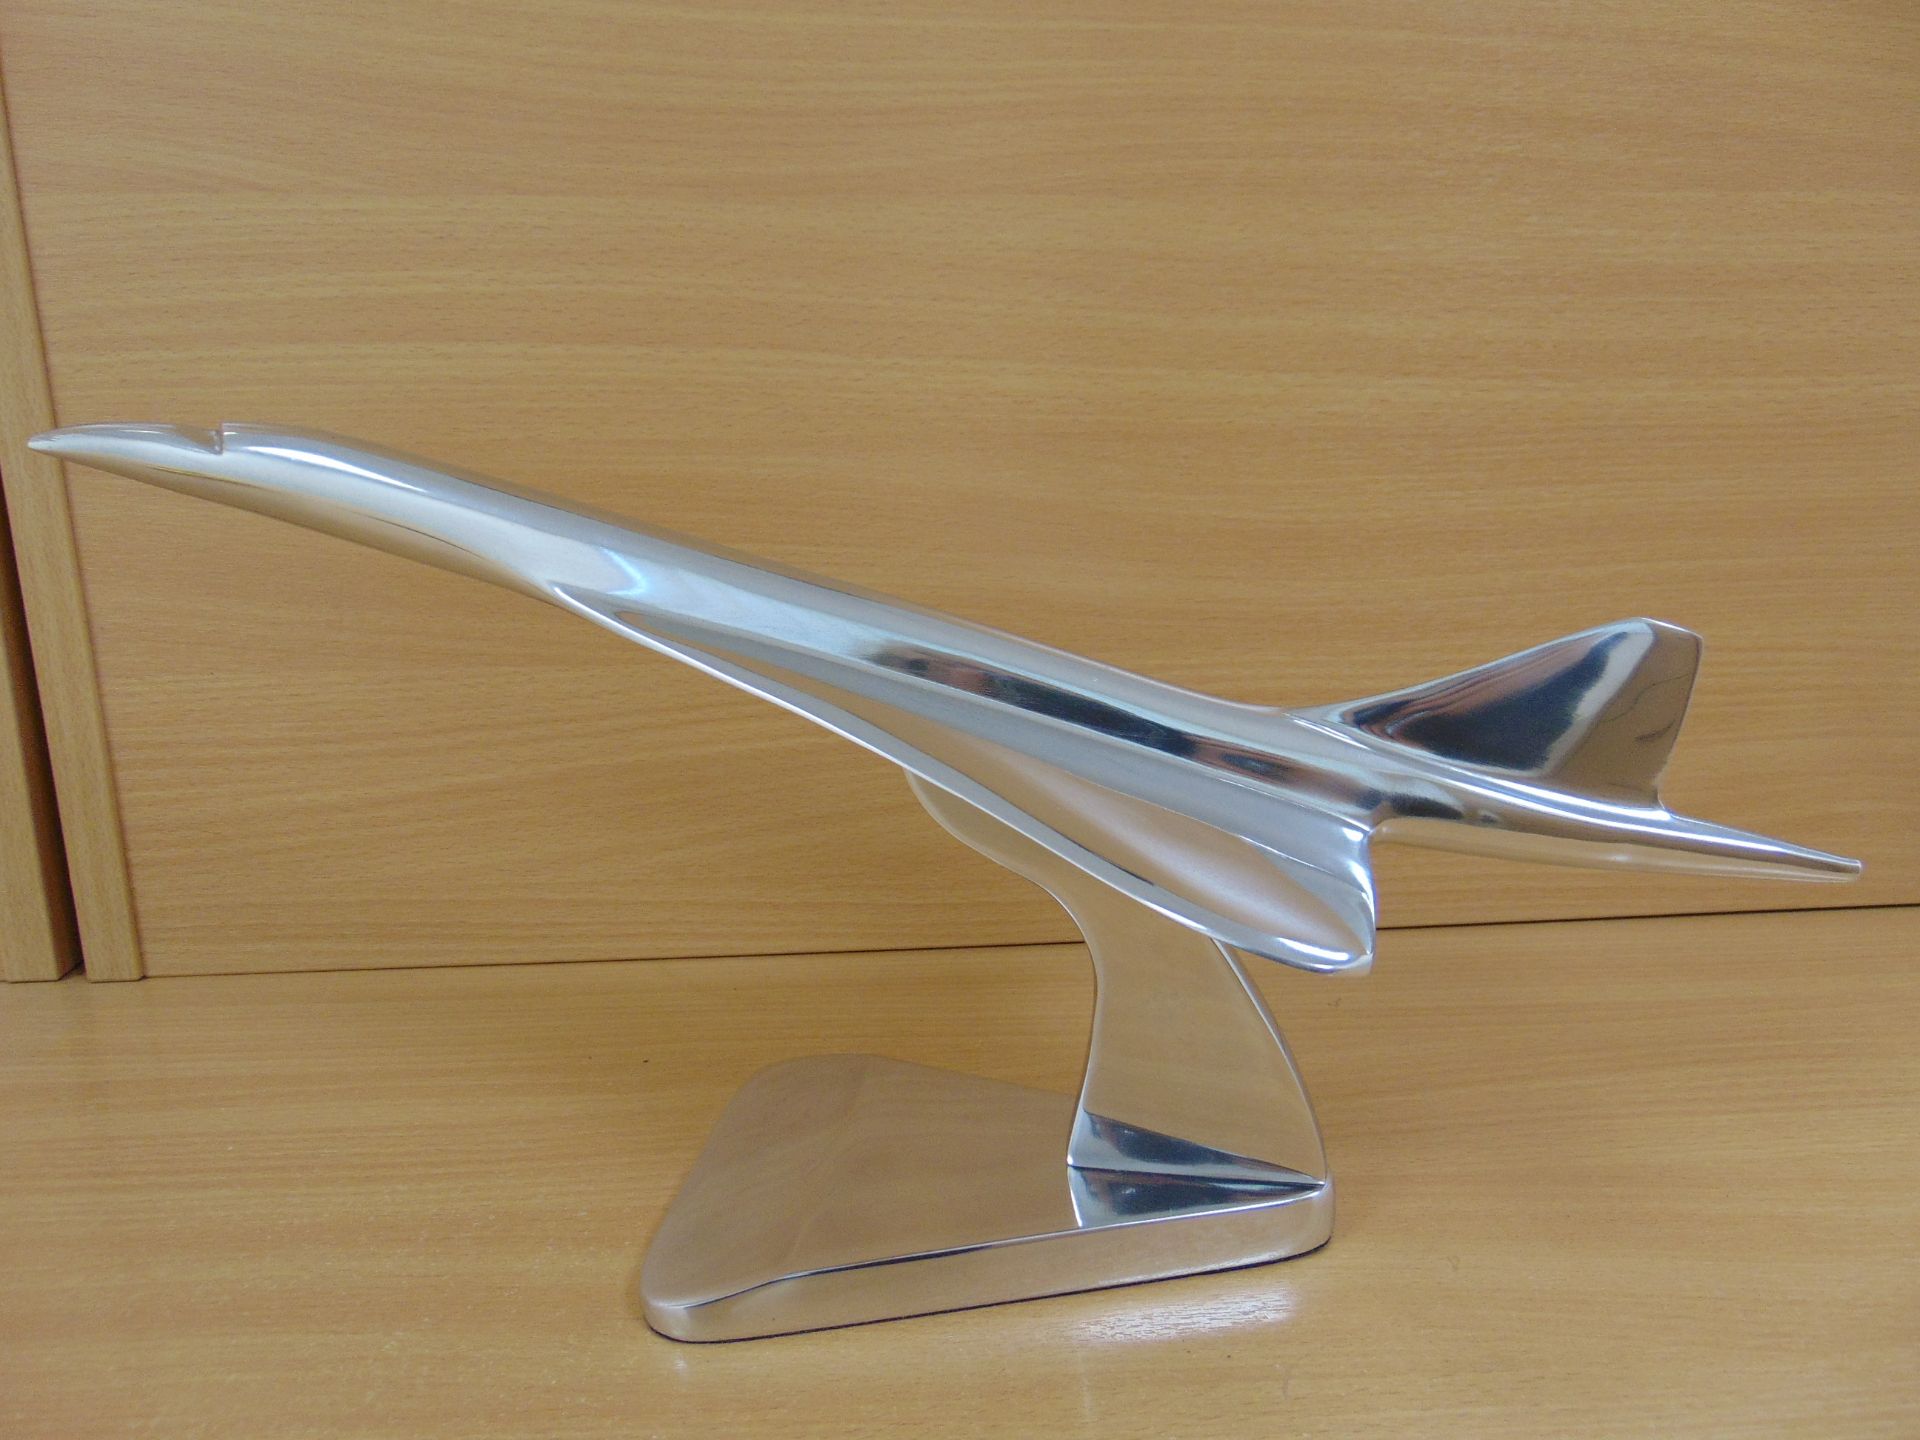 STUNNING POLISHED ALLUMINUM DESK TOP MODEL OF A CONCORD IN FLIGHT ON STAND - Image 8 of 12